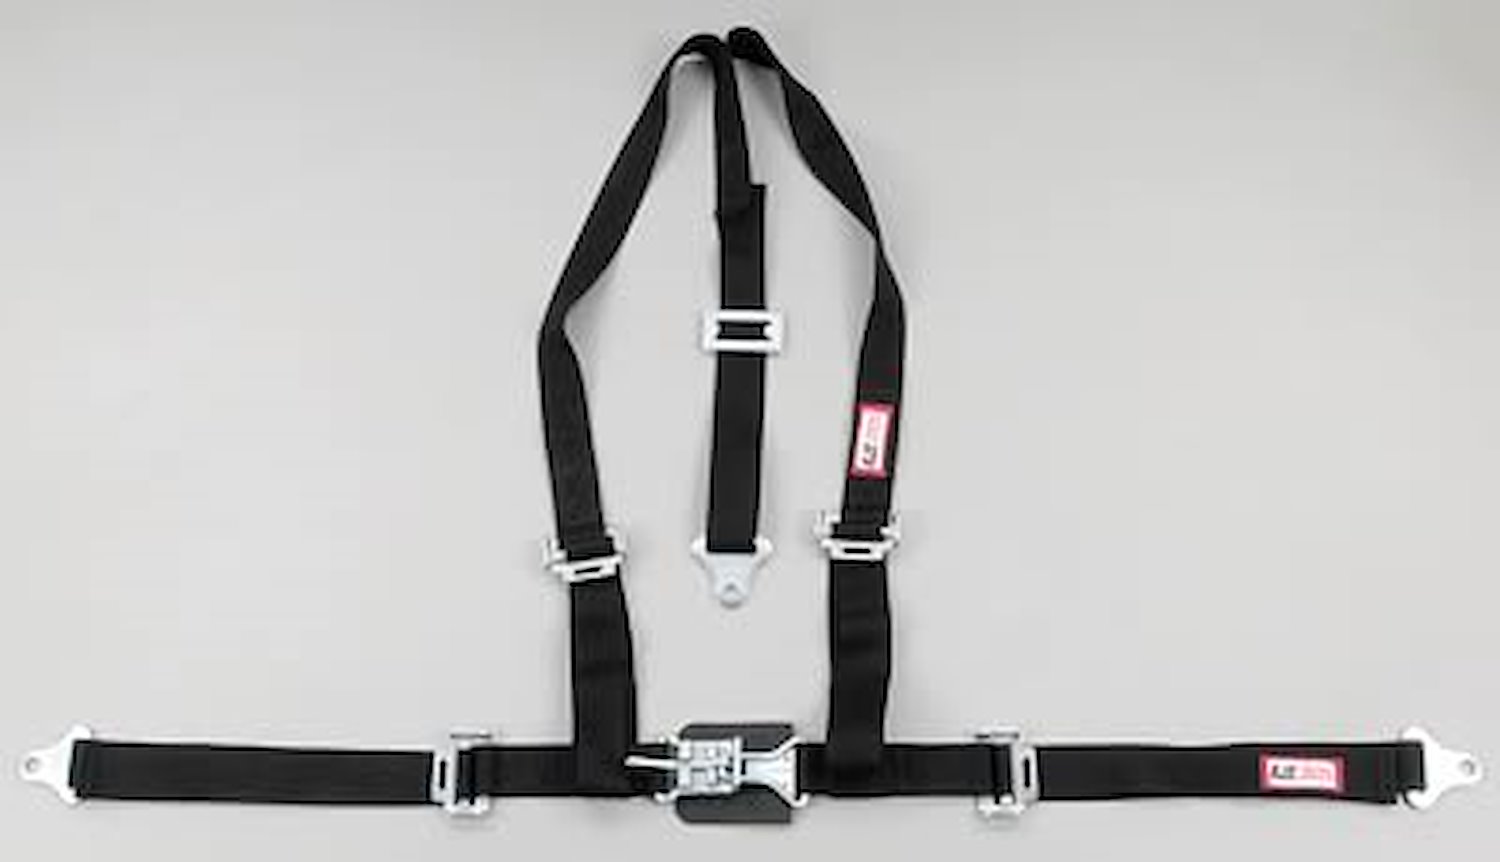 NON-SFI L&L HARNESS 2 PULL UP Lap Belt BOLT SEWN IN 2 S.H. INDIVIDUAL FLOOR Mount w/STERNUM STRAP WRAP/BOLT GRAY